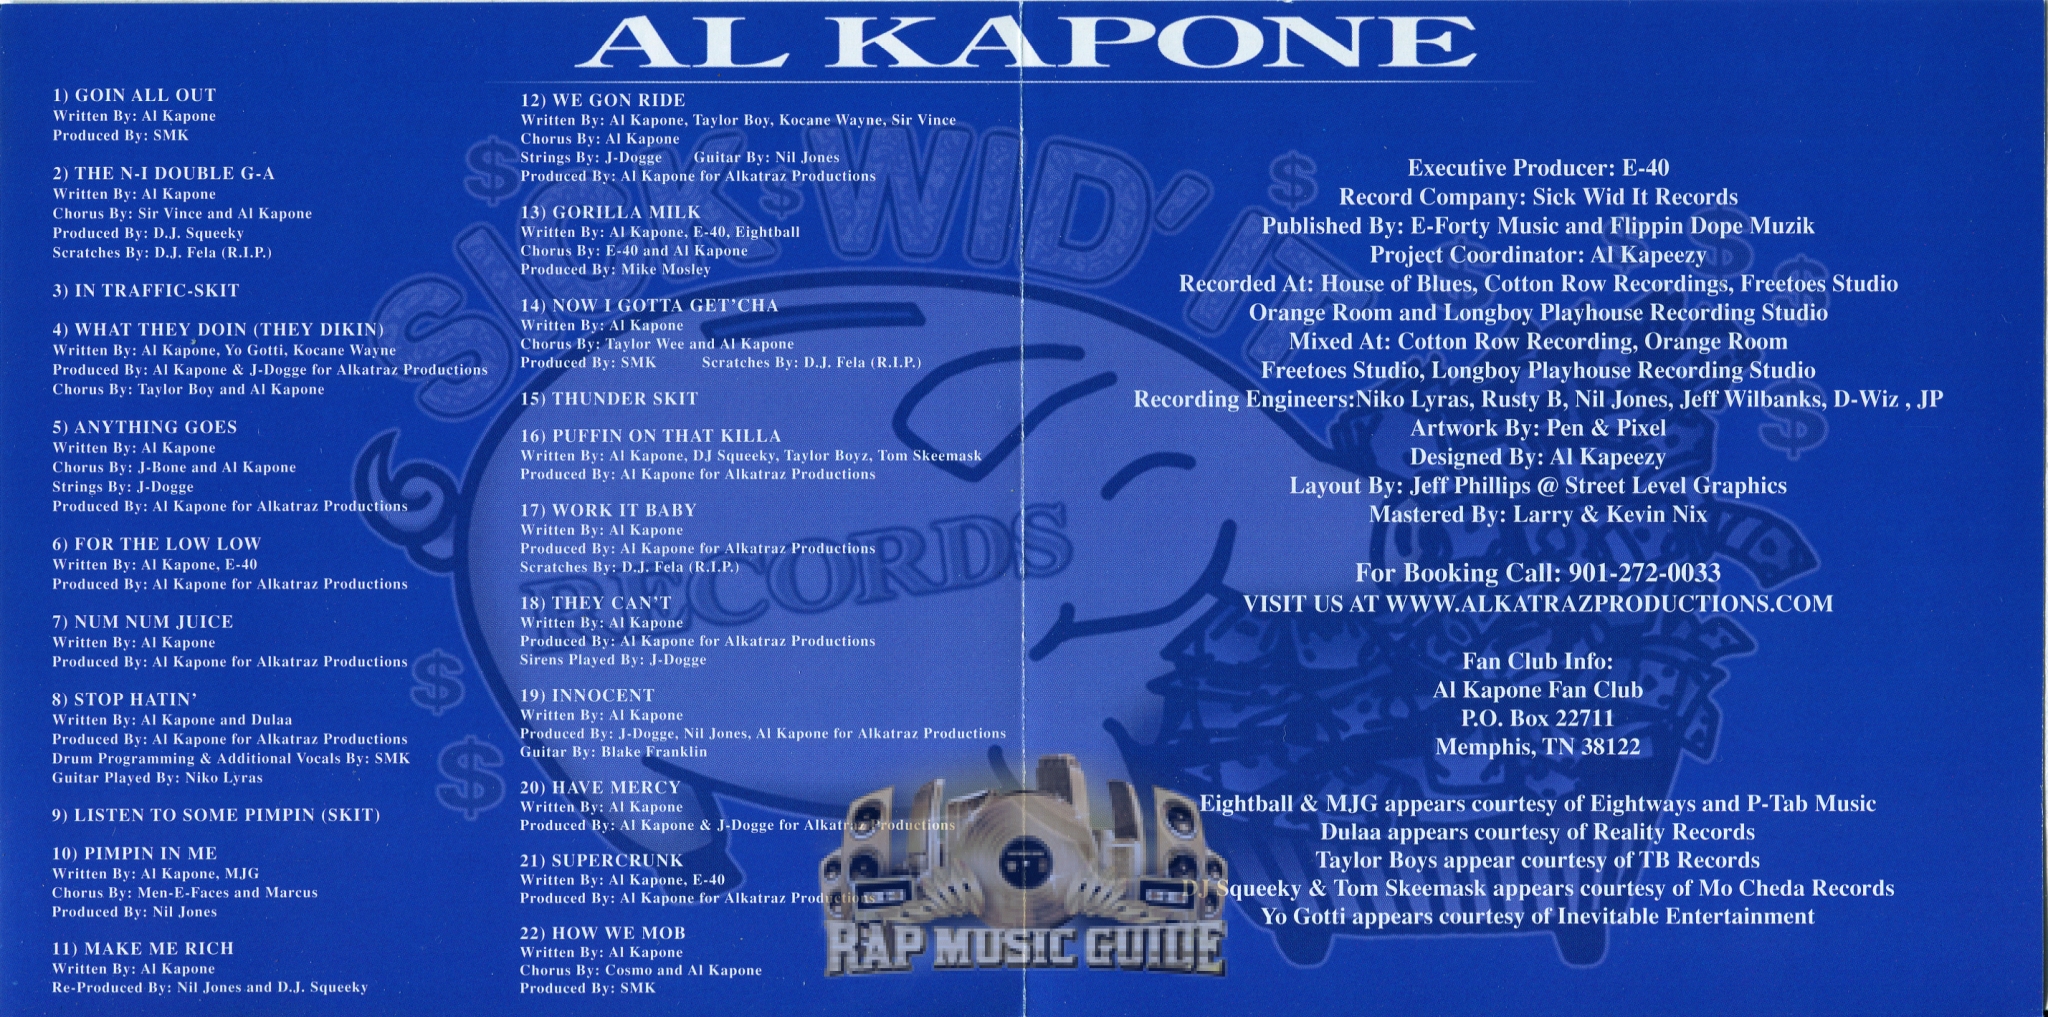 Al Kapone - Goin' All Out: CD | Rap Music Guide